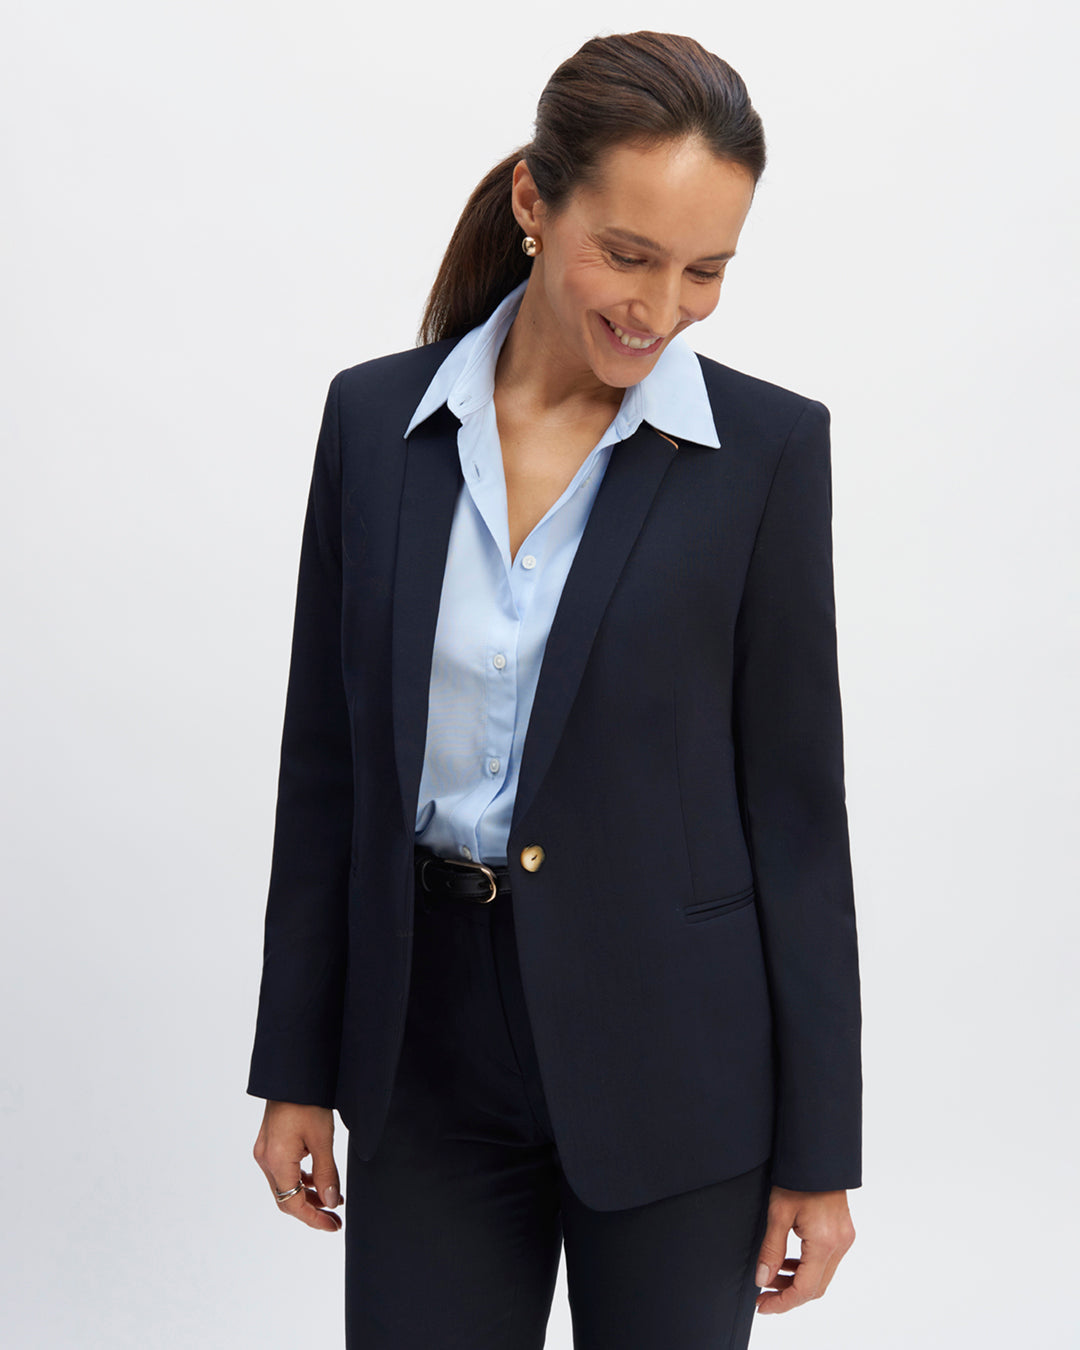 Tailored-blazer-jacket-navy-blue-cropped-neck-tailored-length-under-the-bottom-two-pockets-pass-pocketed-two-pockets-inner-entirely-lined-bottom-buttoned-sleeves-buttoned-camel-17H10-tailored-for-women-paris-